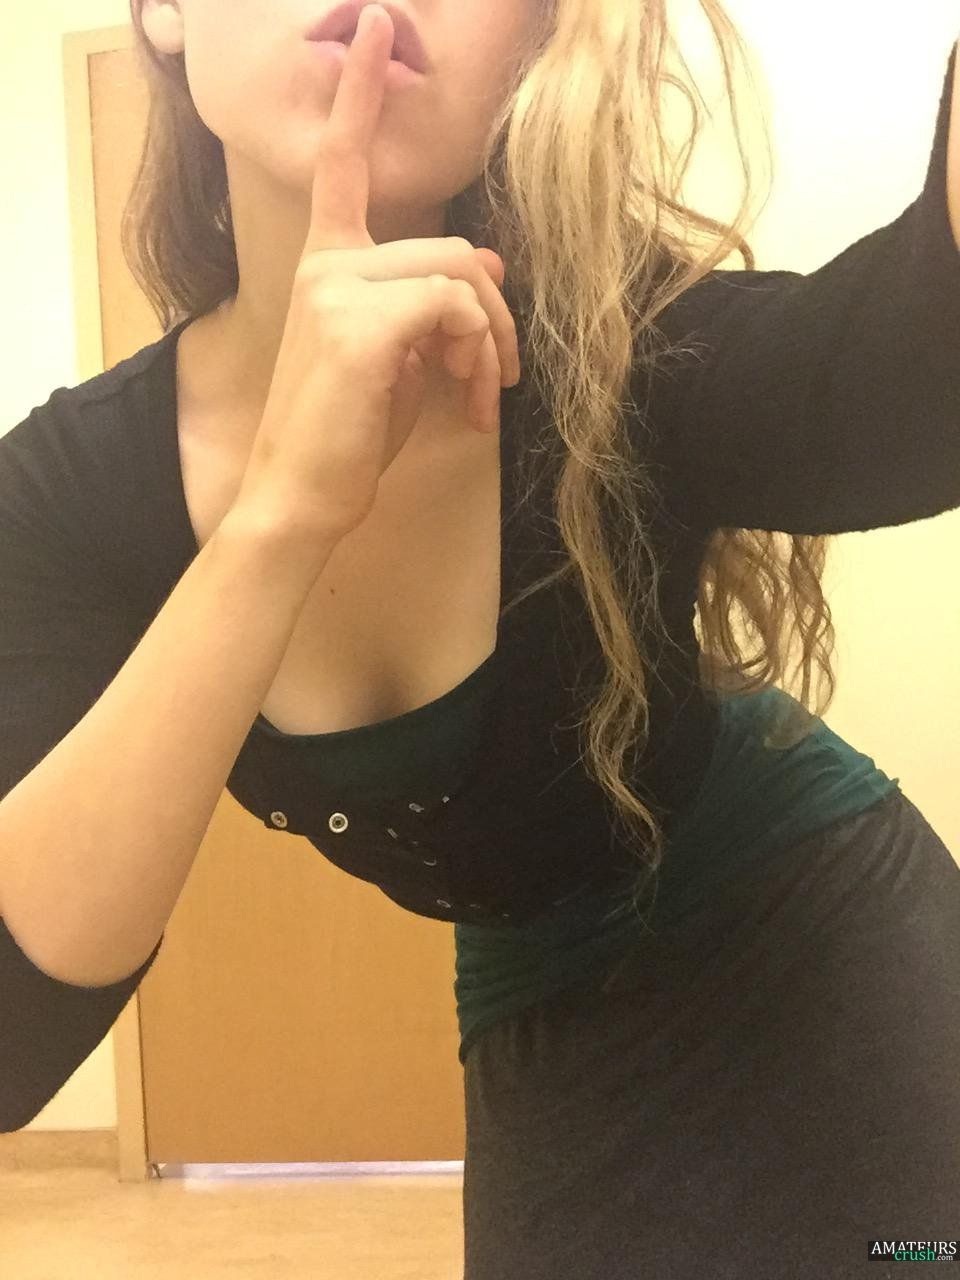 Coworker snapchat